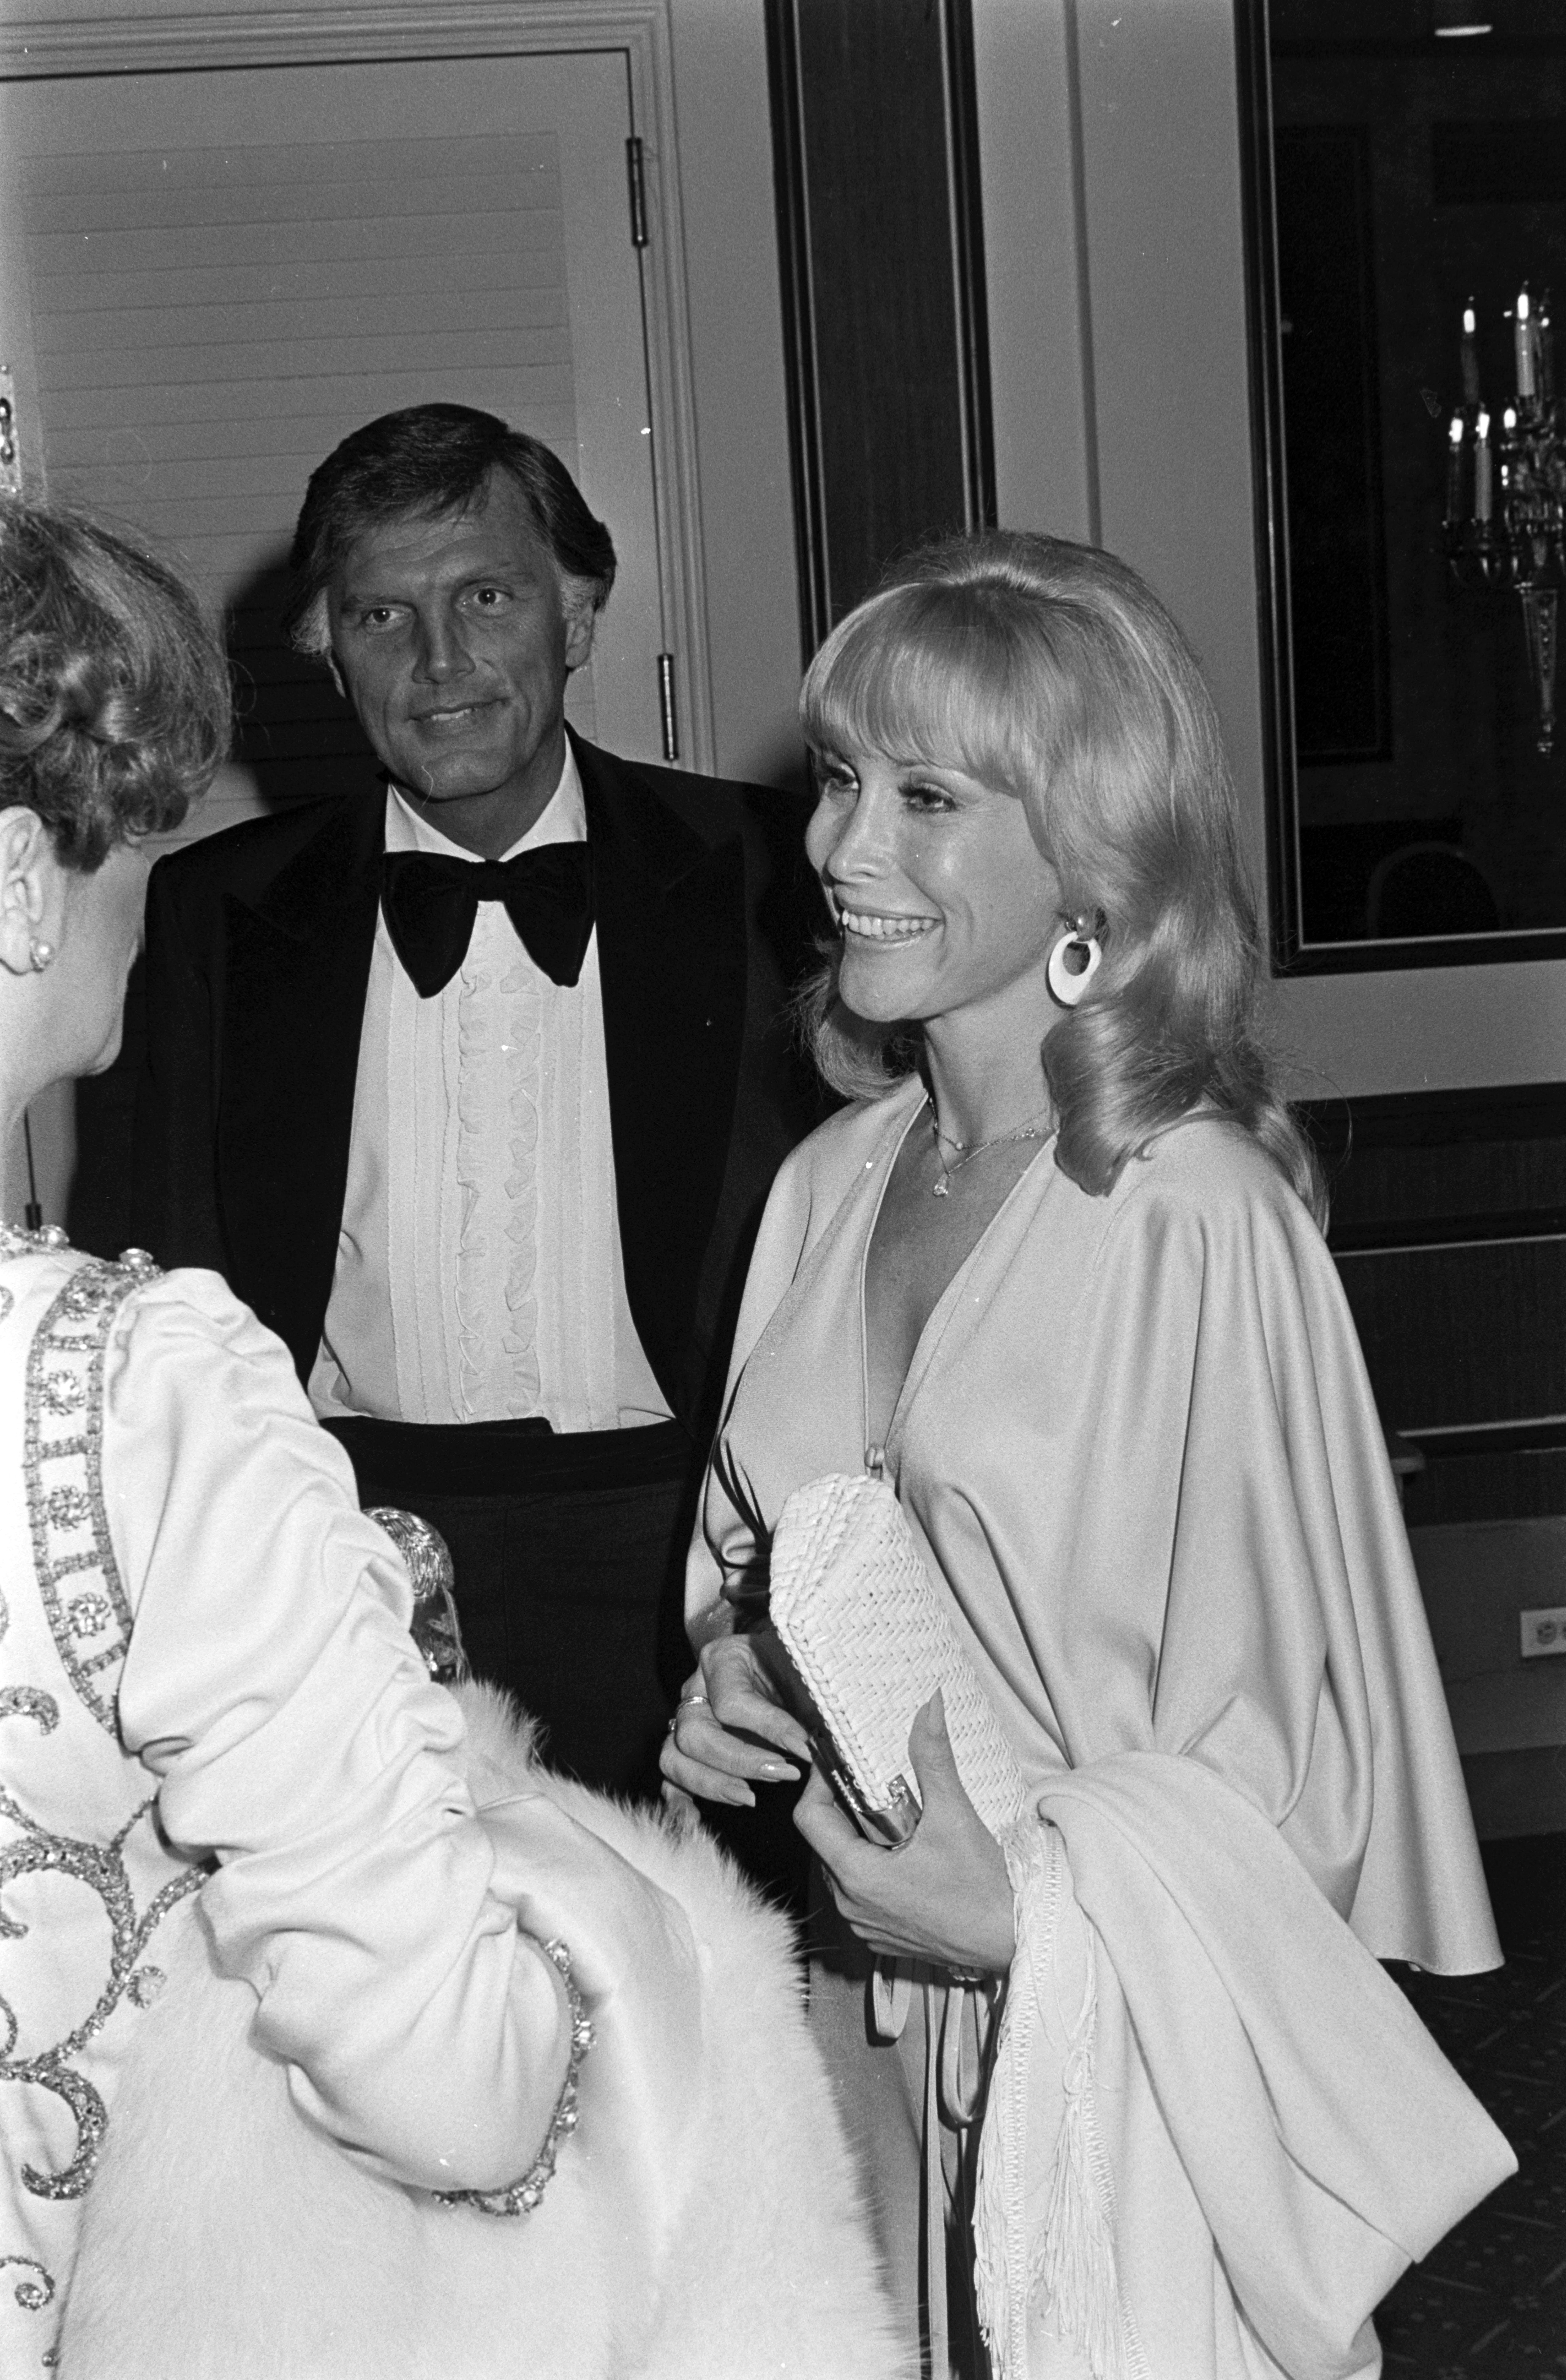 Charles Donald Fegert and Barbara Eden at an event in Chicago on June 9, 1977 | Source: Getty Images